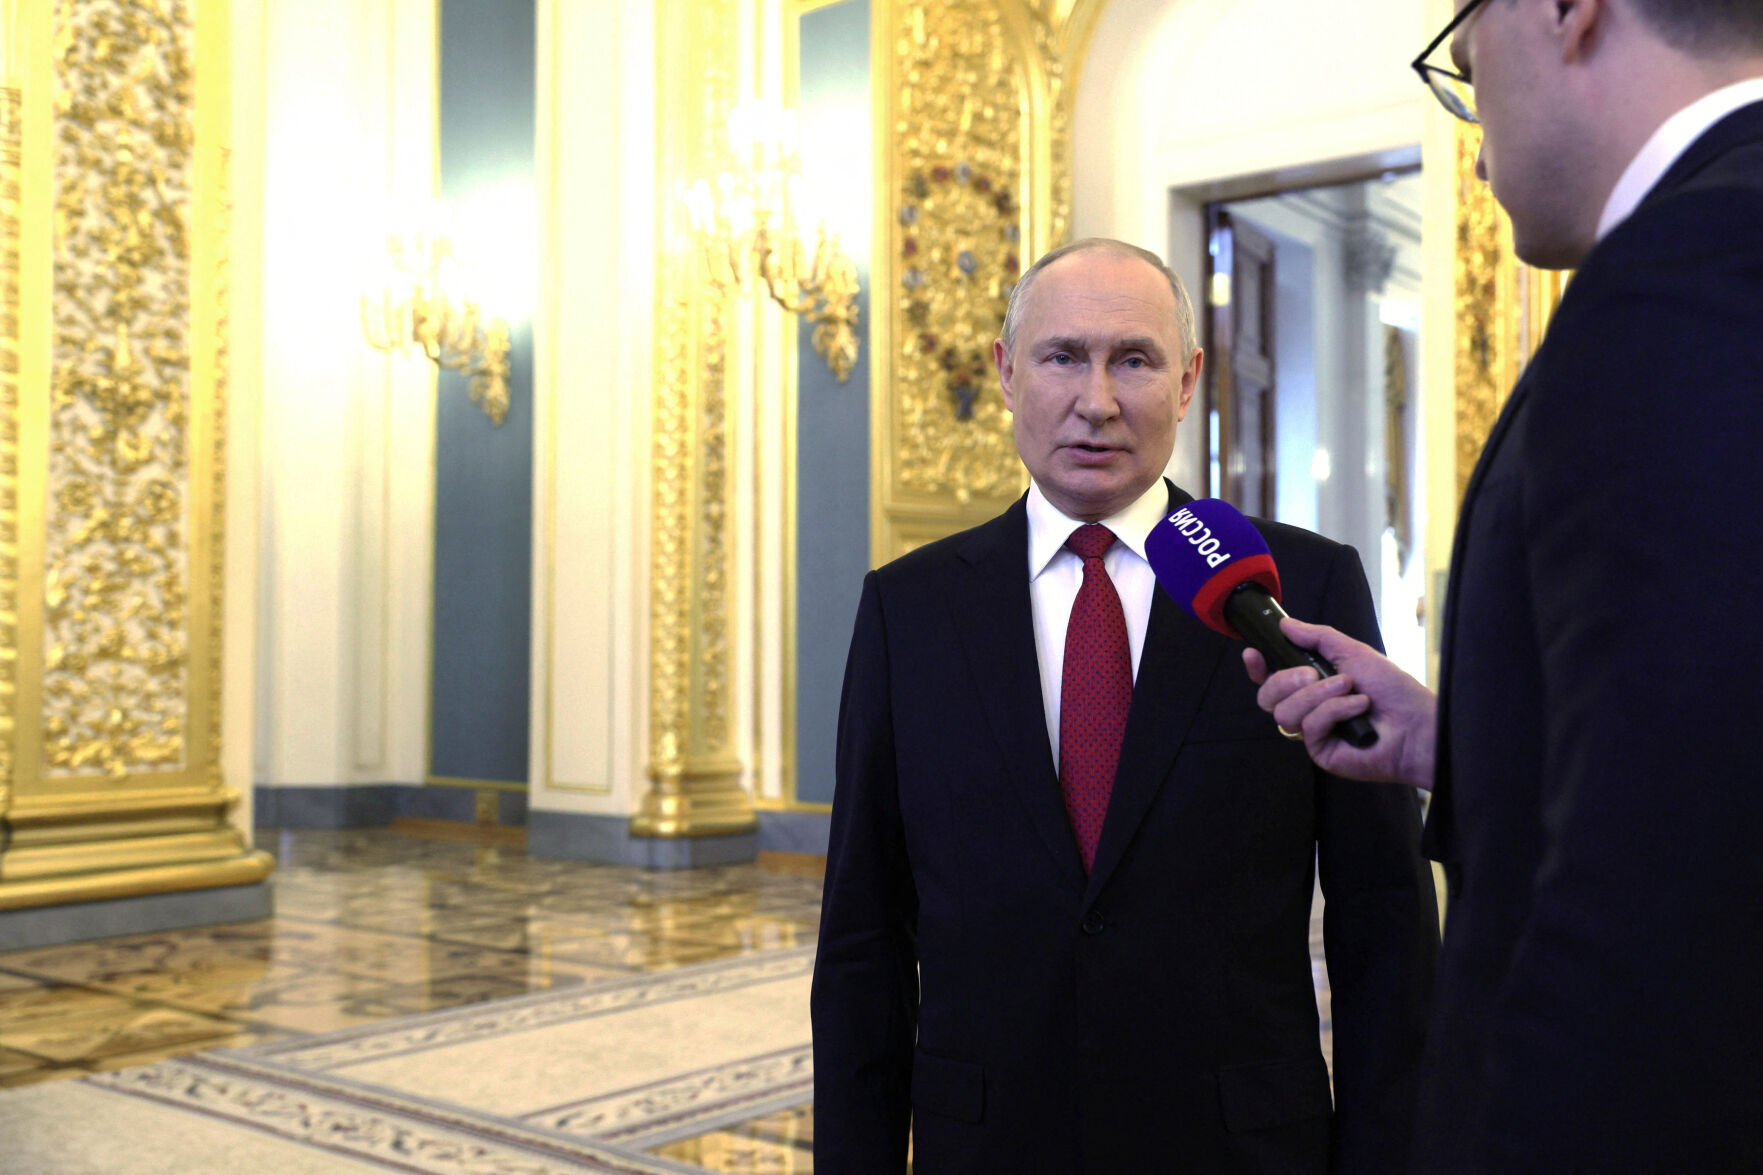 National Pride and Sovereignty - Putin's Popularity: Factors Influencing Public Opinion